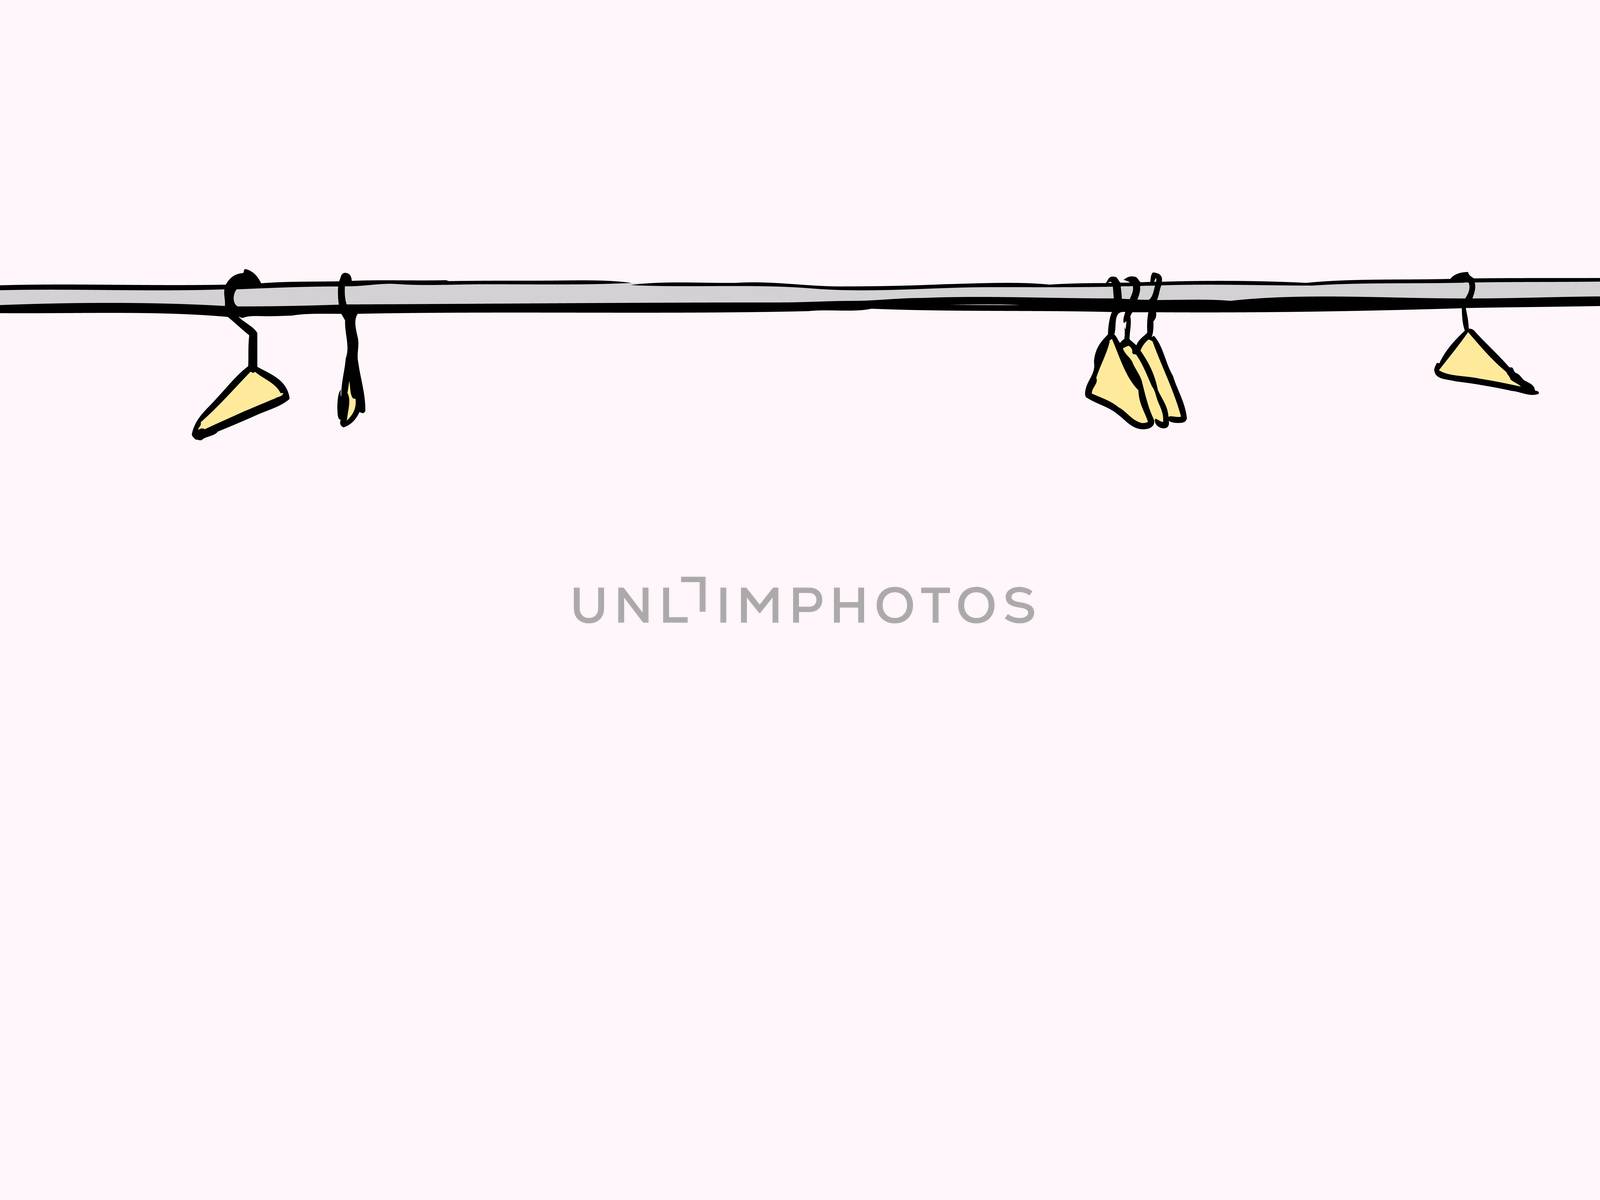 Empty clothes hangers scattered along metal rod over white background